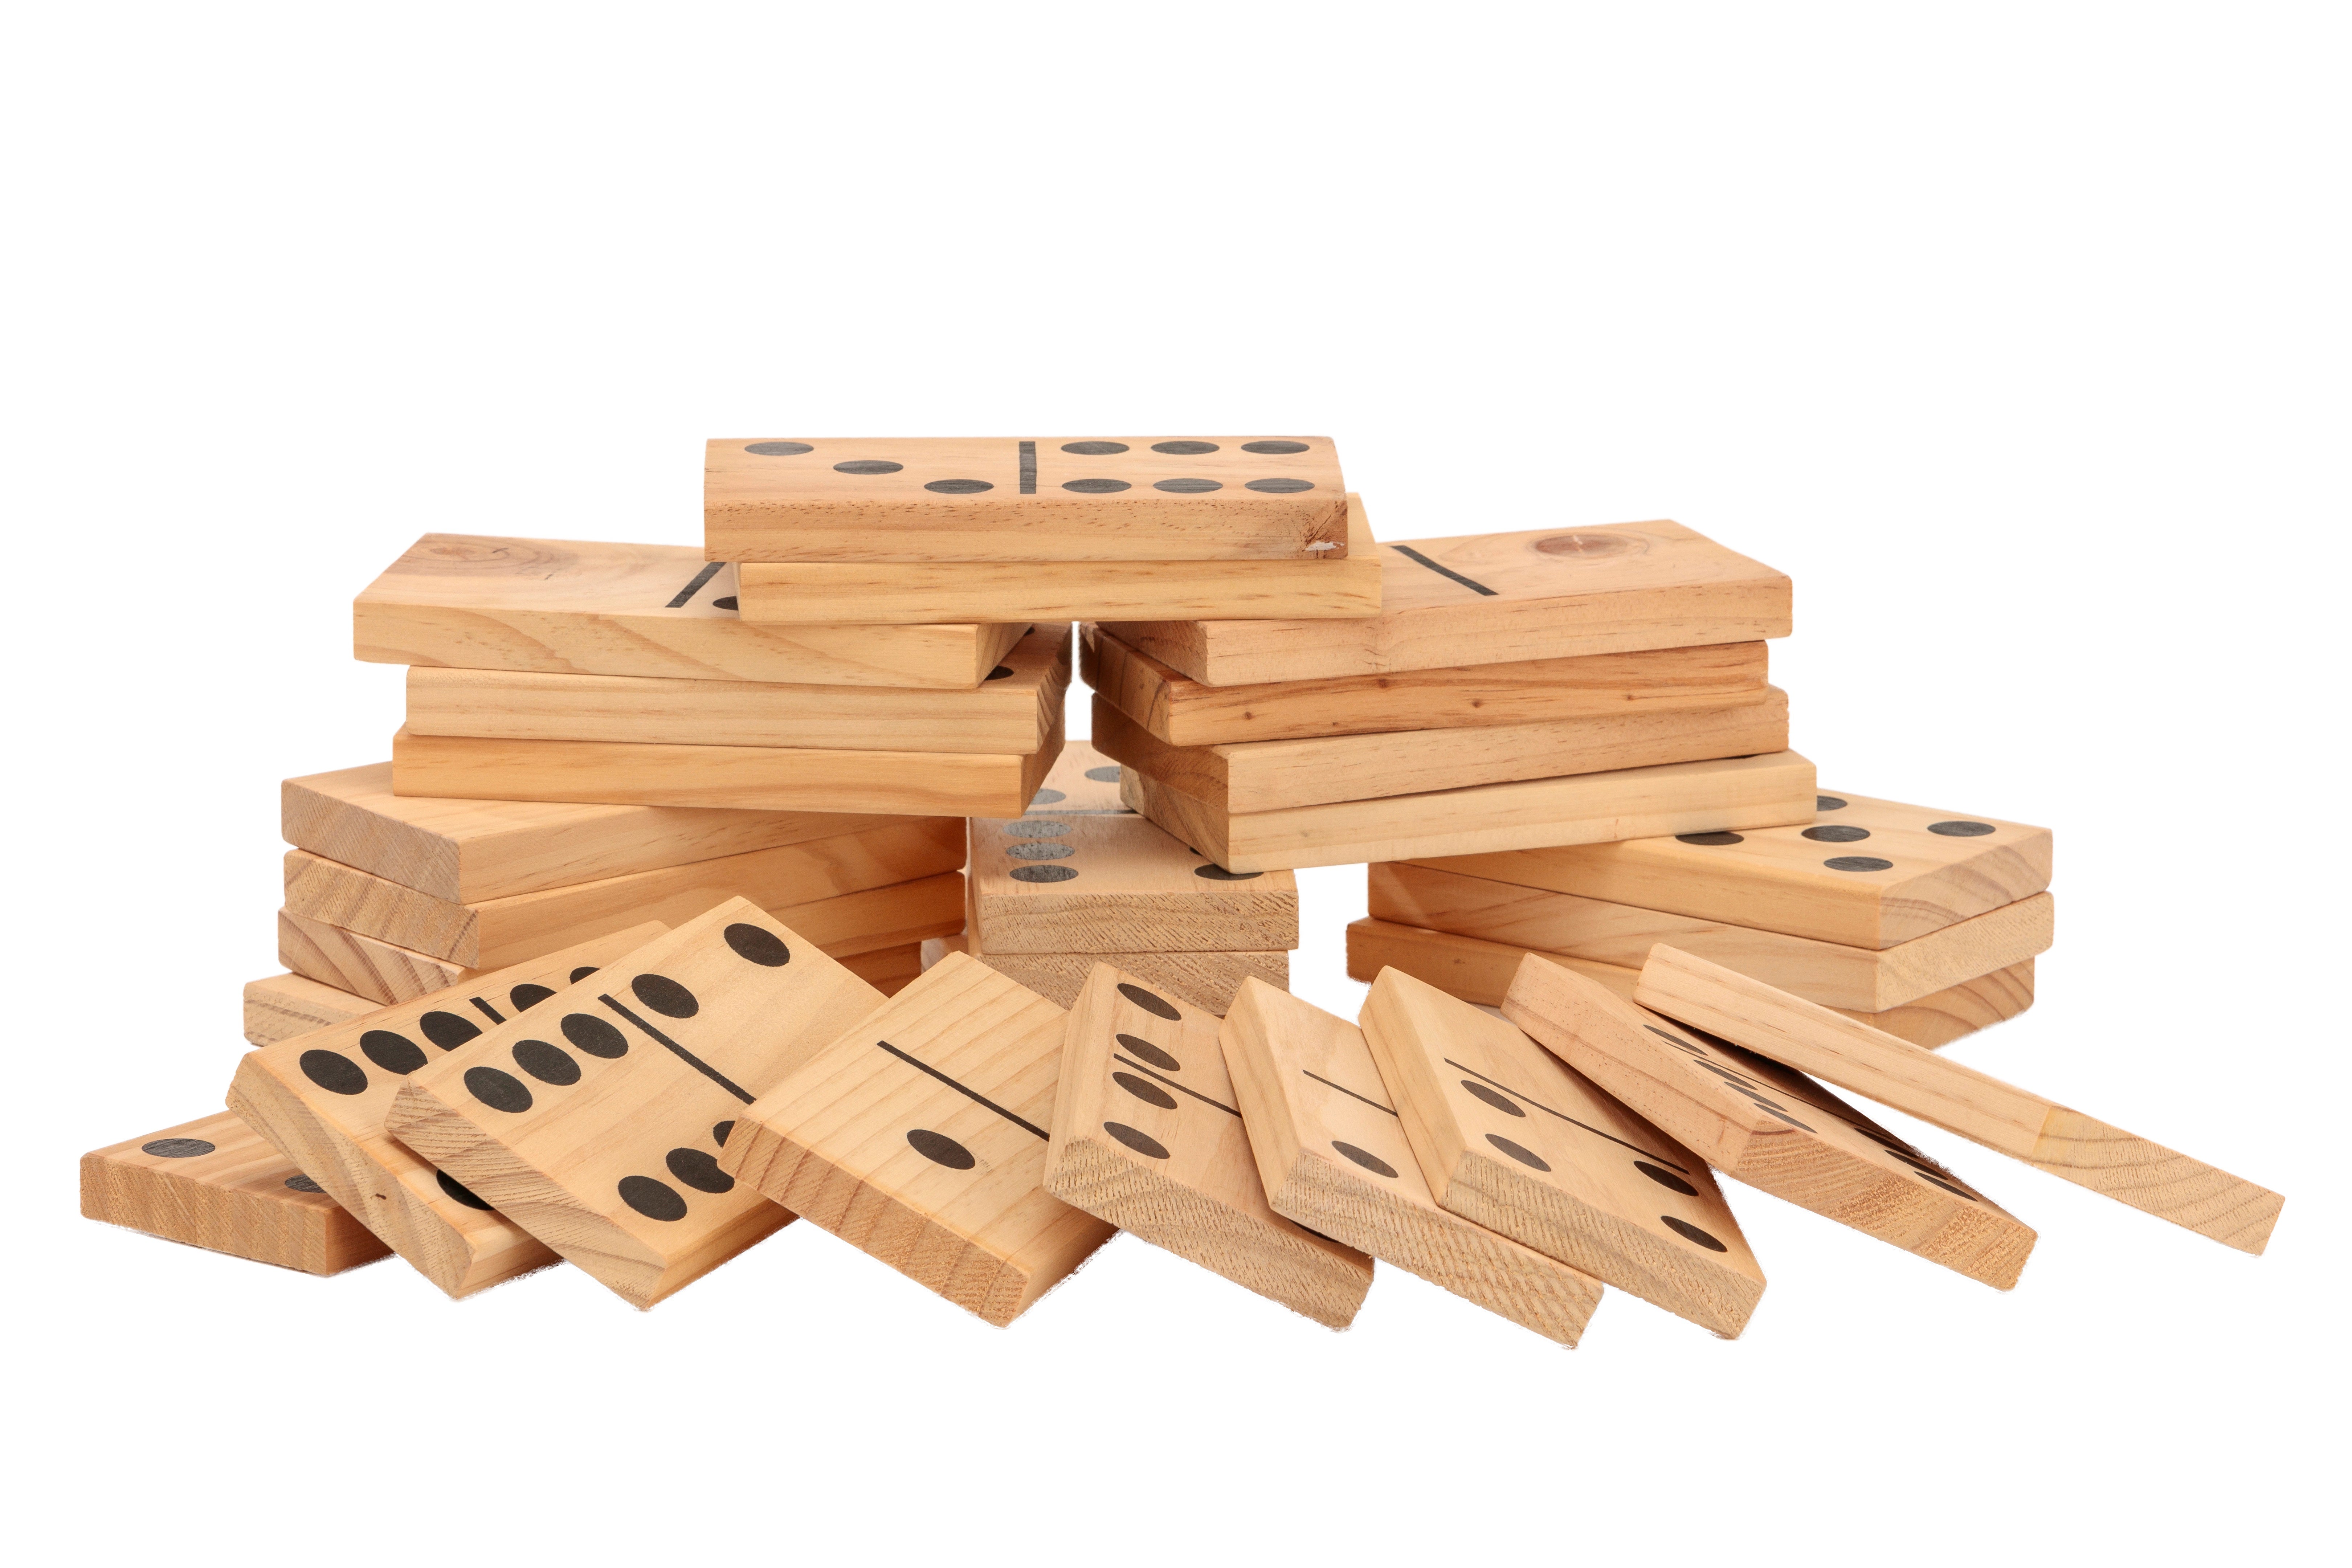 Giant Outdoor Dominoes Game Set with 28 Pieces 15cm